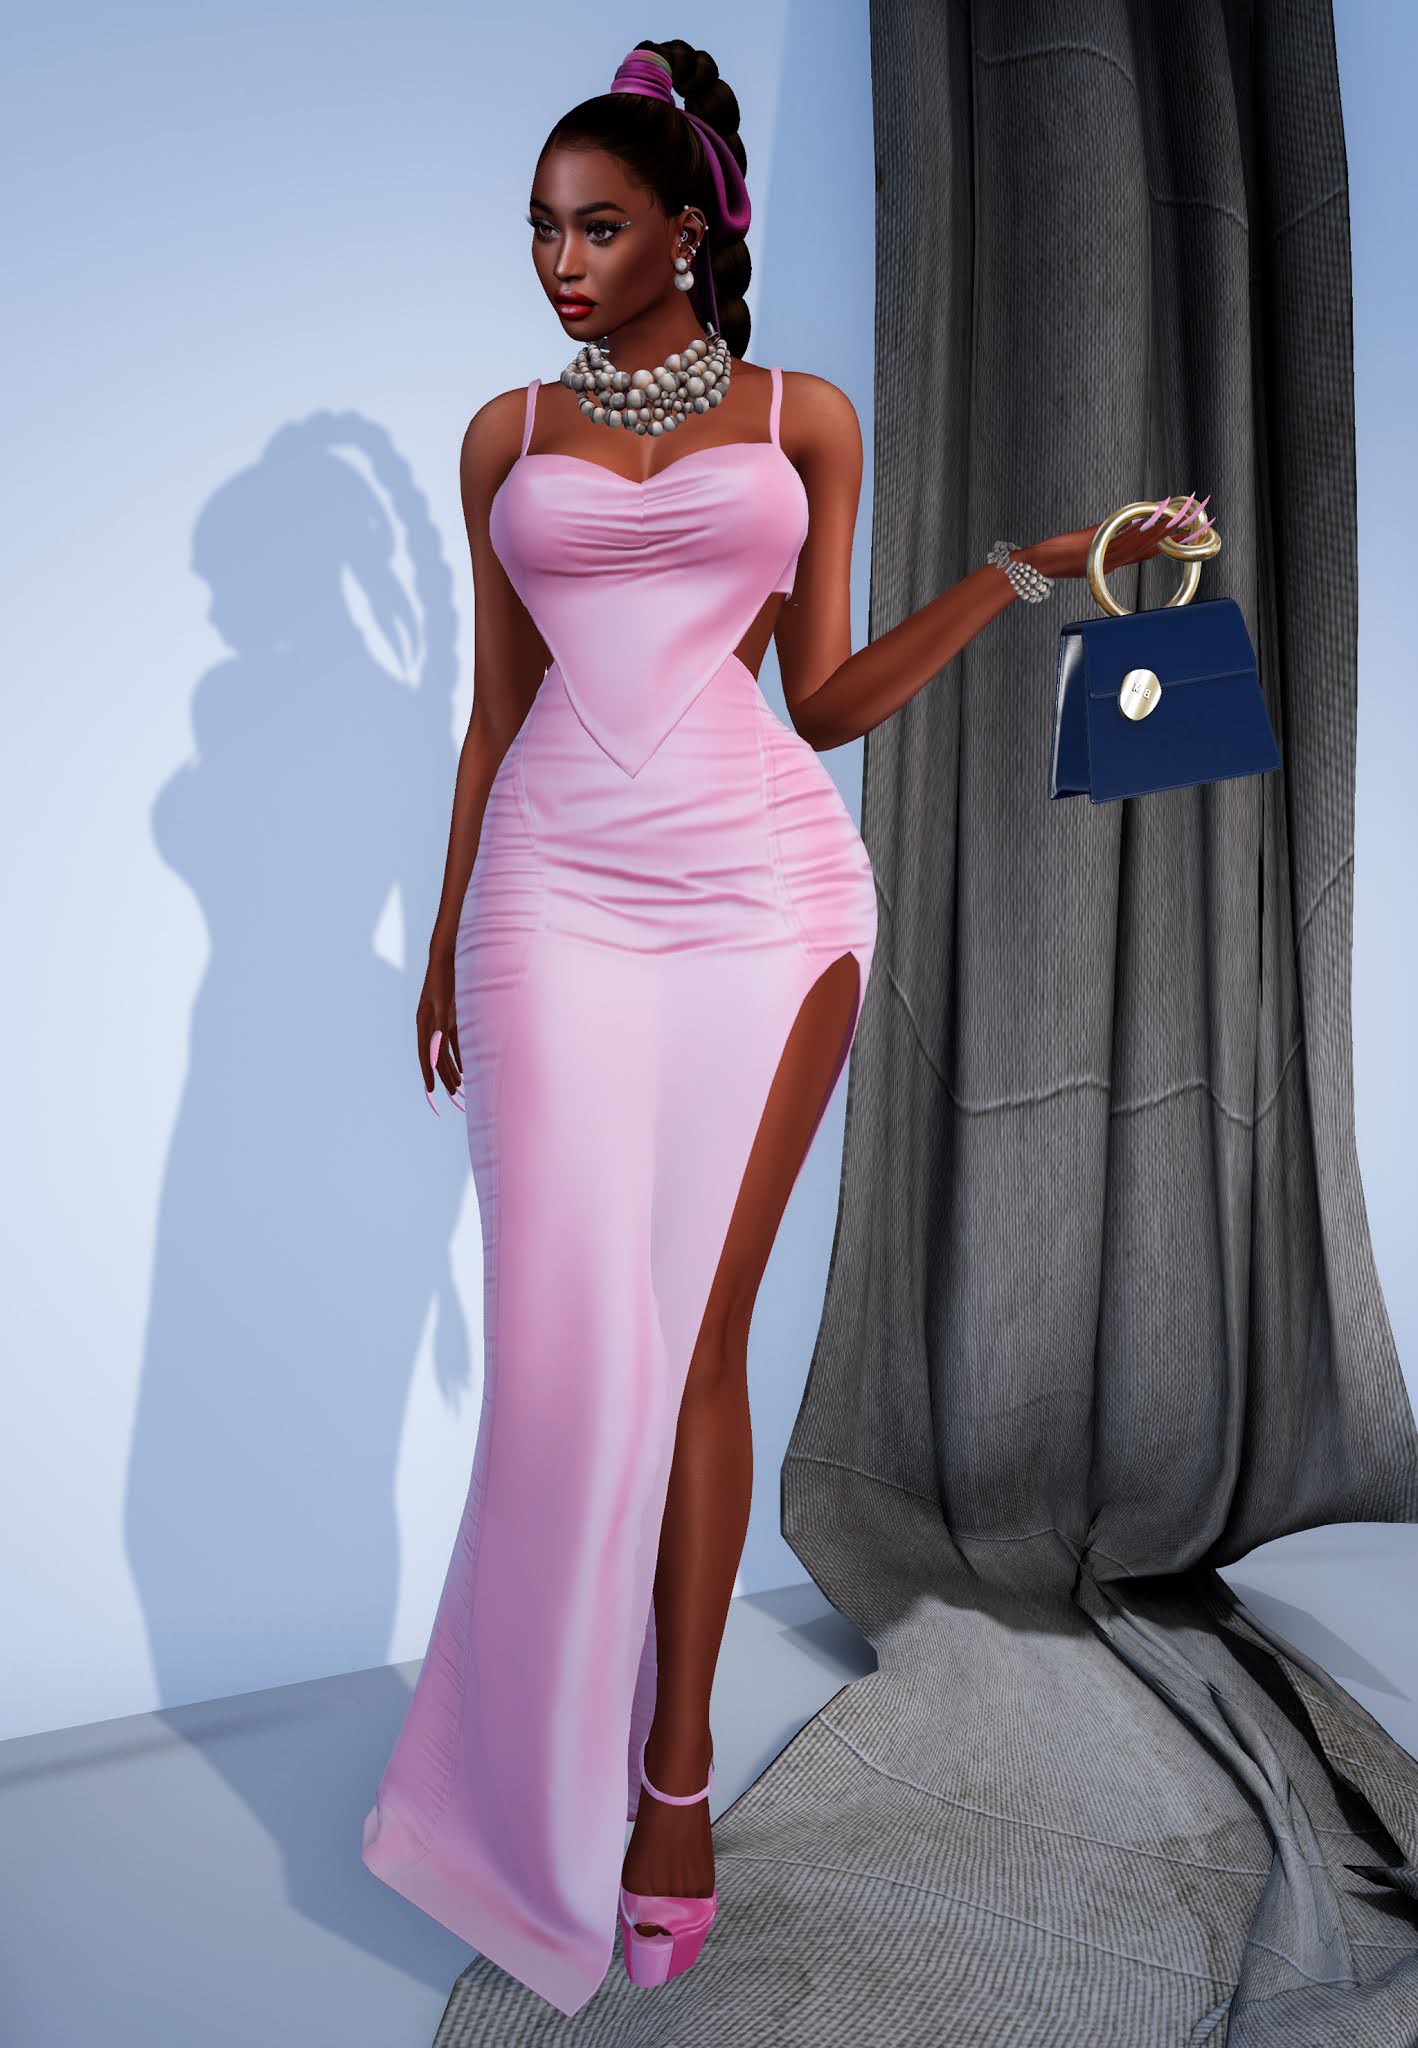 The Glorious Diva: The beauty of Claudette